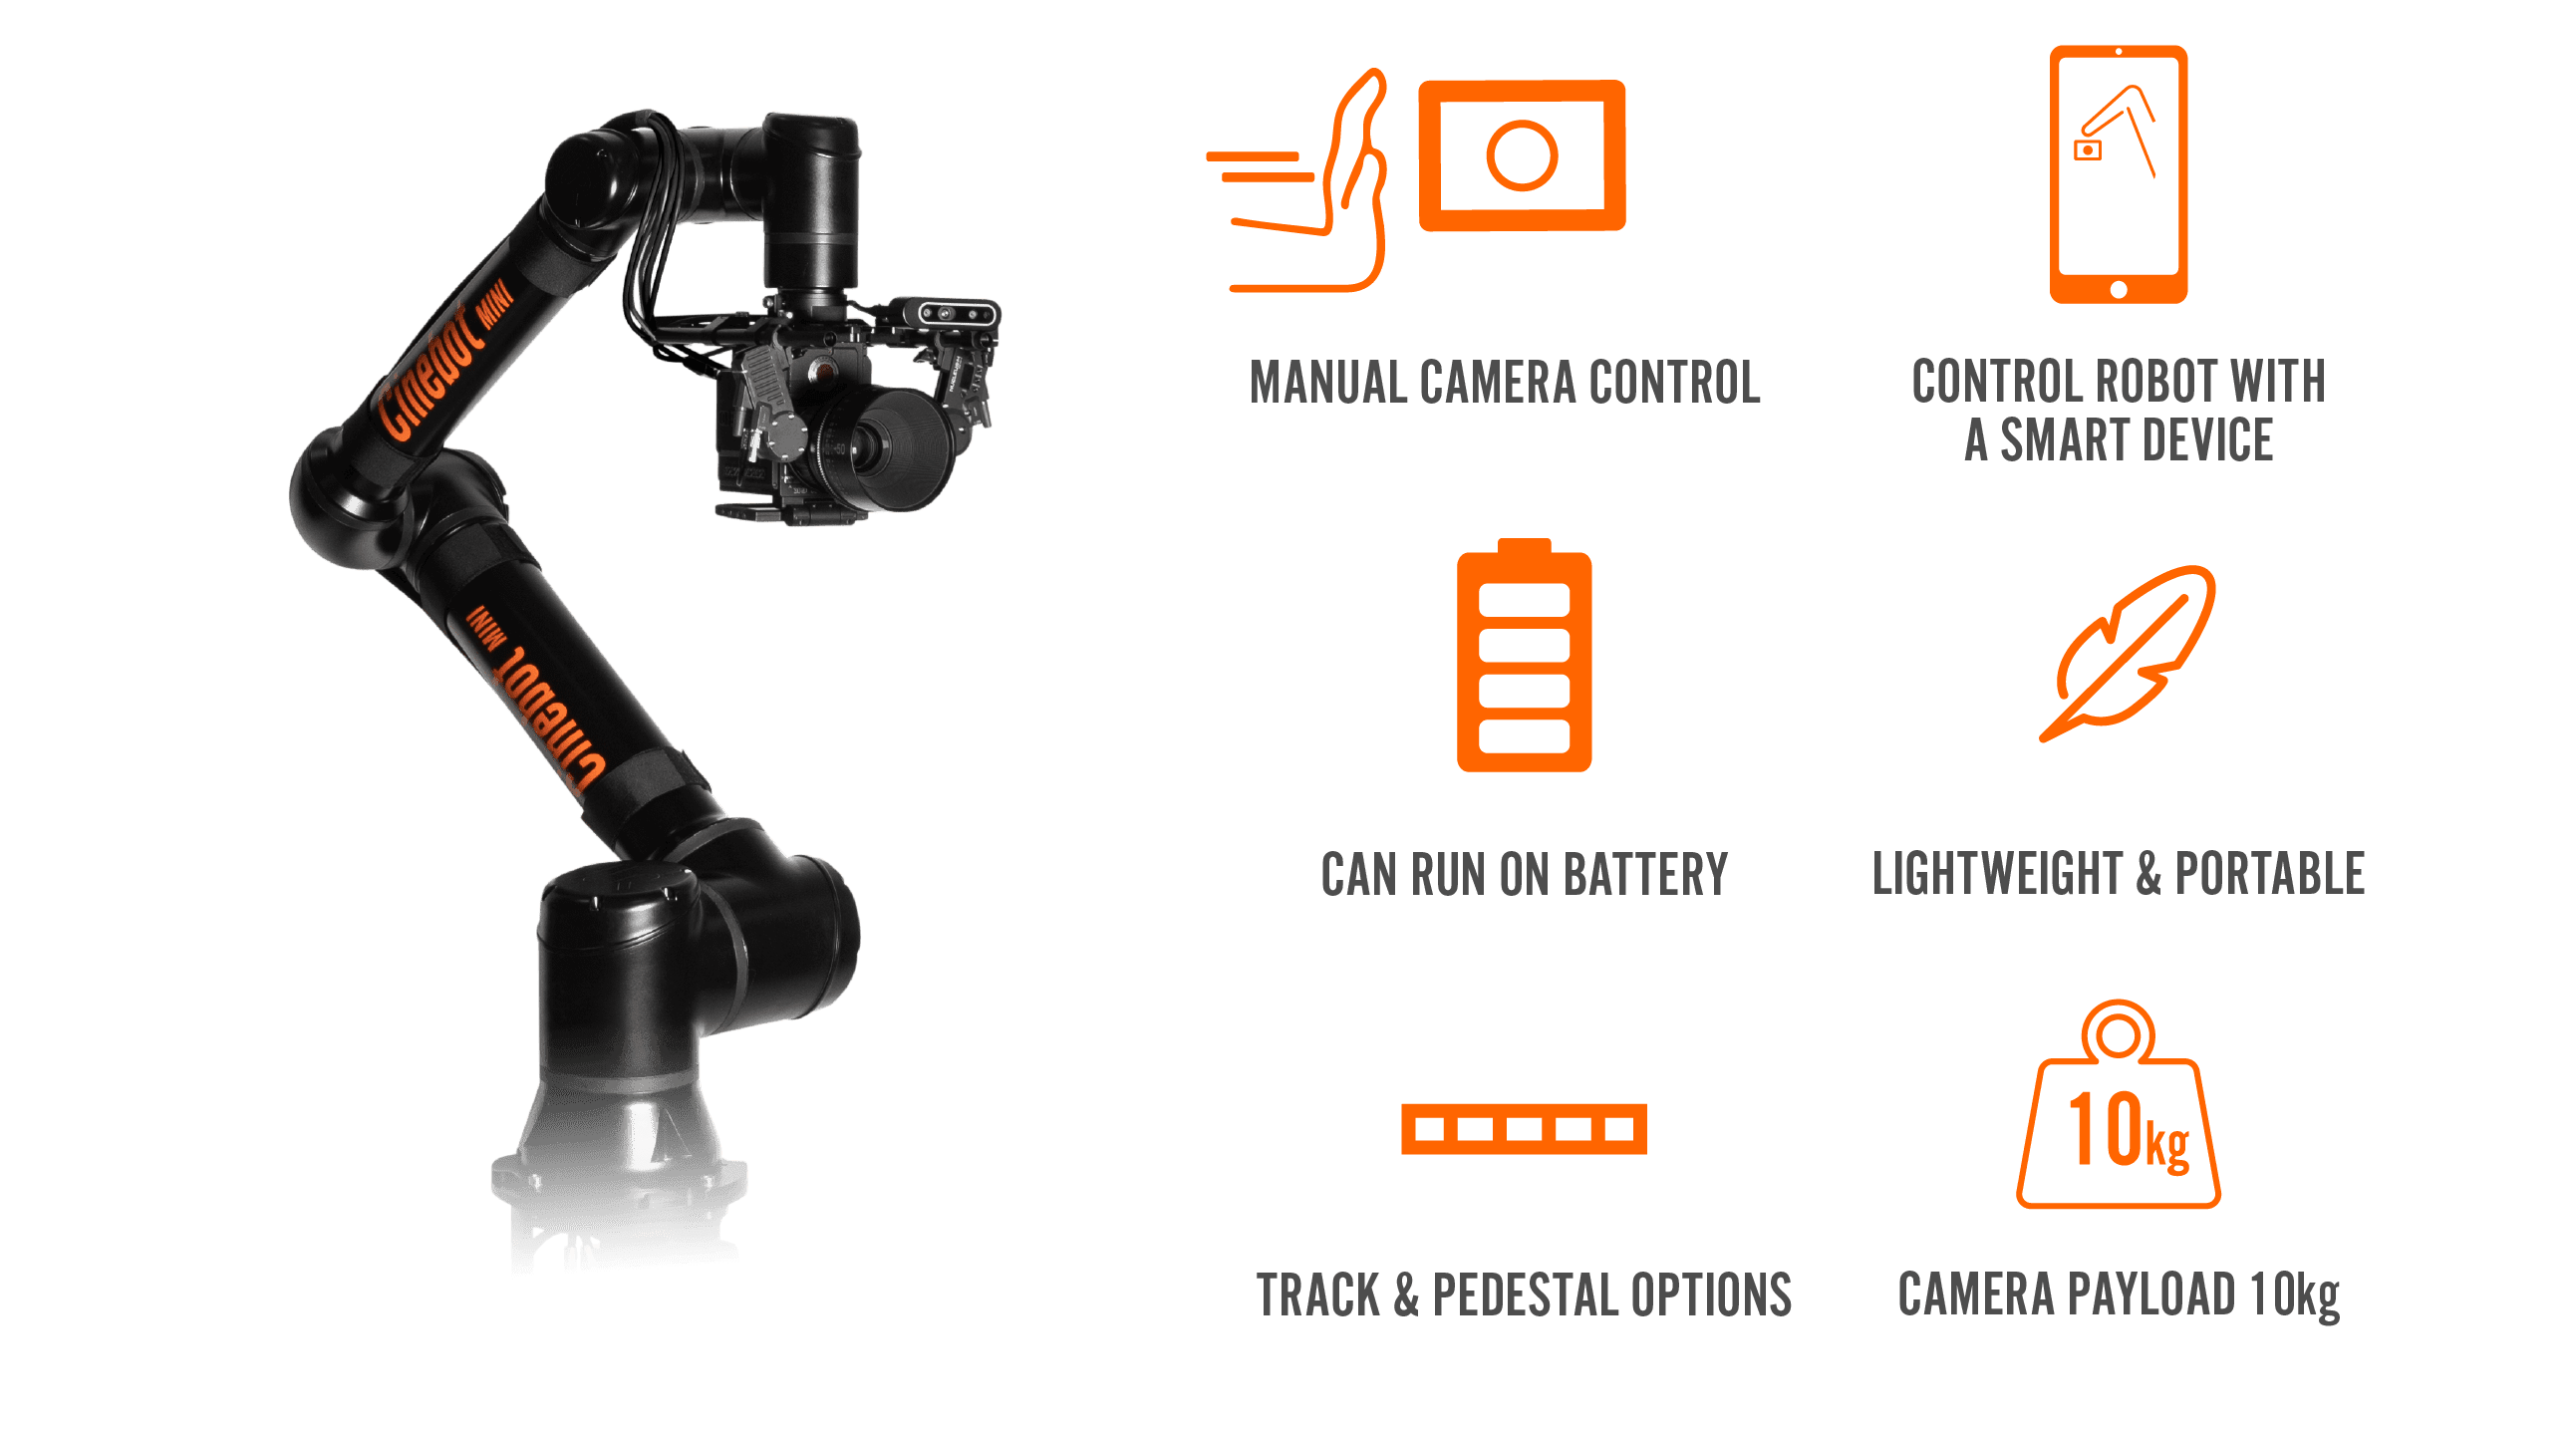 Promotional graphic showcasing the Cinebot Mini, a state-of-the-art motion control robotic arm with a sleek black body and orange accents. The robot is equipped with a camera and positioned next to icons highlighting its key features: control with a smart device, lightweight and portable design, and a 10kg camera payload capacity.